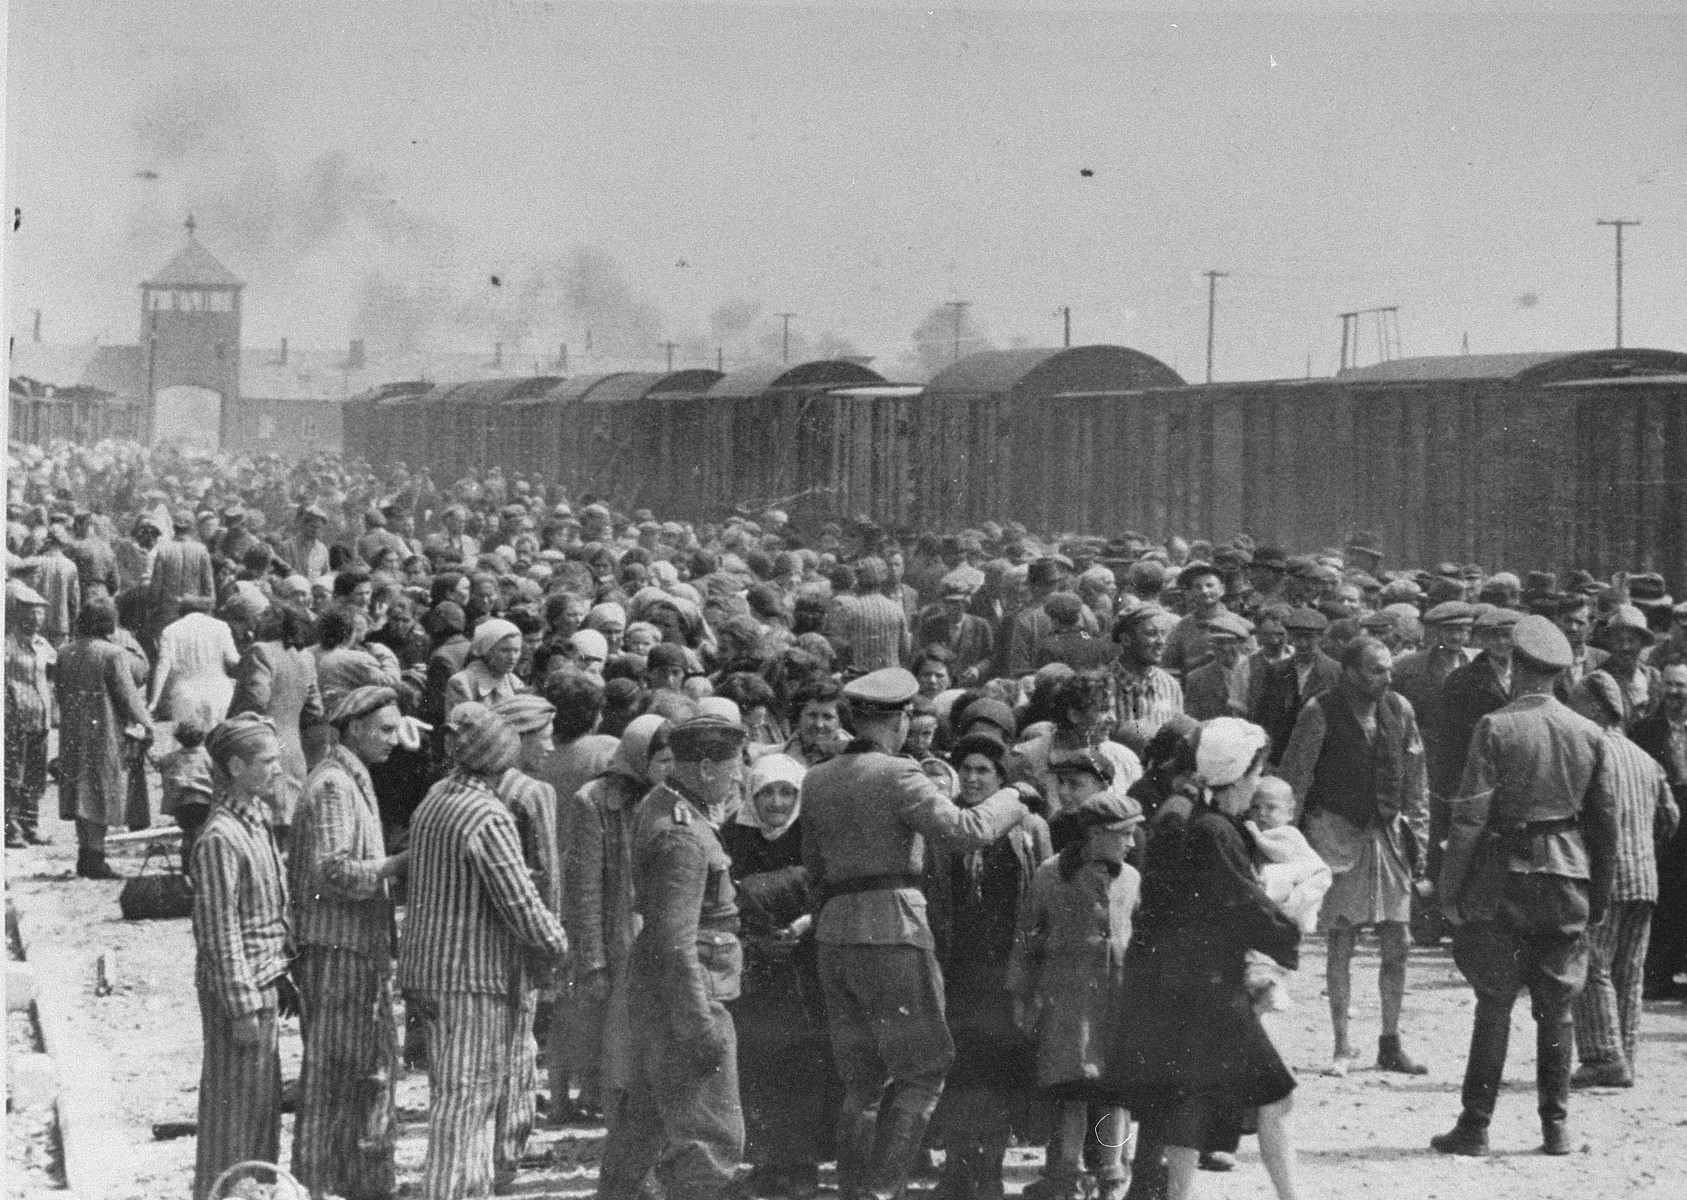 Jews from Subcarpathian Rus undergo a selection on the ramp at Auschwitz-Birkenau.

Pictured in front right is either SS Unterscharfuehrer Wilhelm Emmerich or SS Haupsturmfuehrer Georg Hoecker assisted by the Jewish prisoner Hans Schorr.  Also pictured in the front, second from the front is Jakob de Hond from Holland [also identified as Szlomo Glogower from Makow, Poland] and Yap Van-Gelder, far left [also identified as Shlomo Pivnik].  The woman next to him as been identified as Rosa Landau from Er-Mihaifalva (Valea-Lui-Mihai).